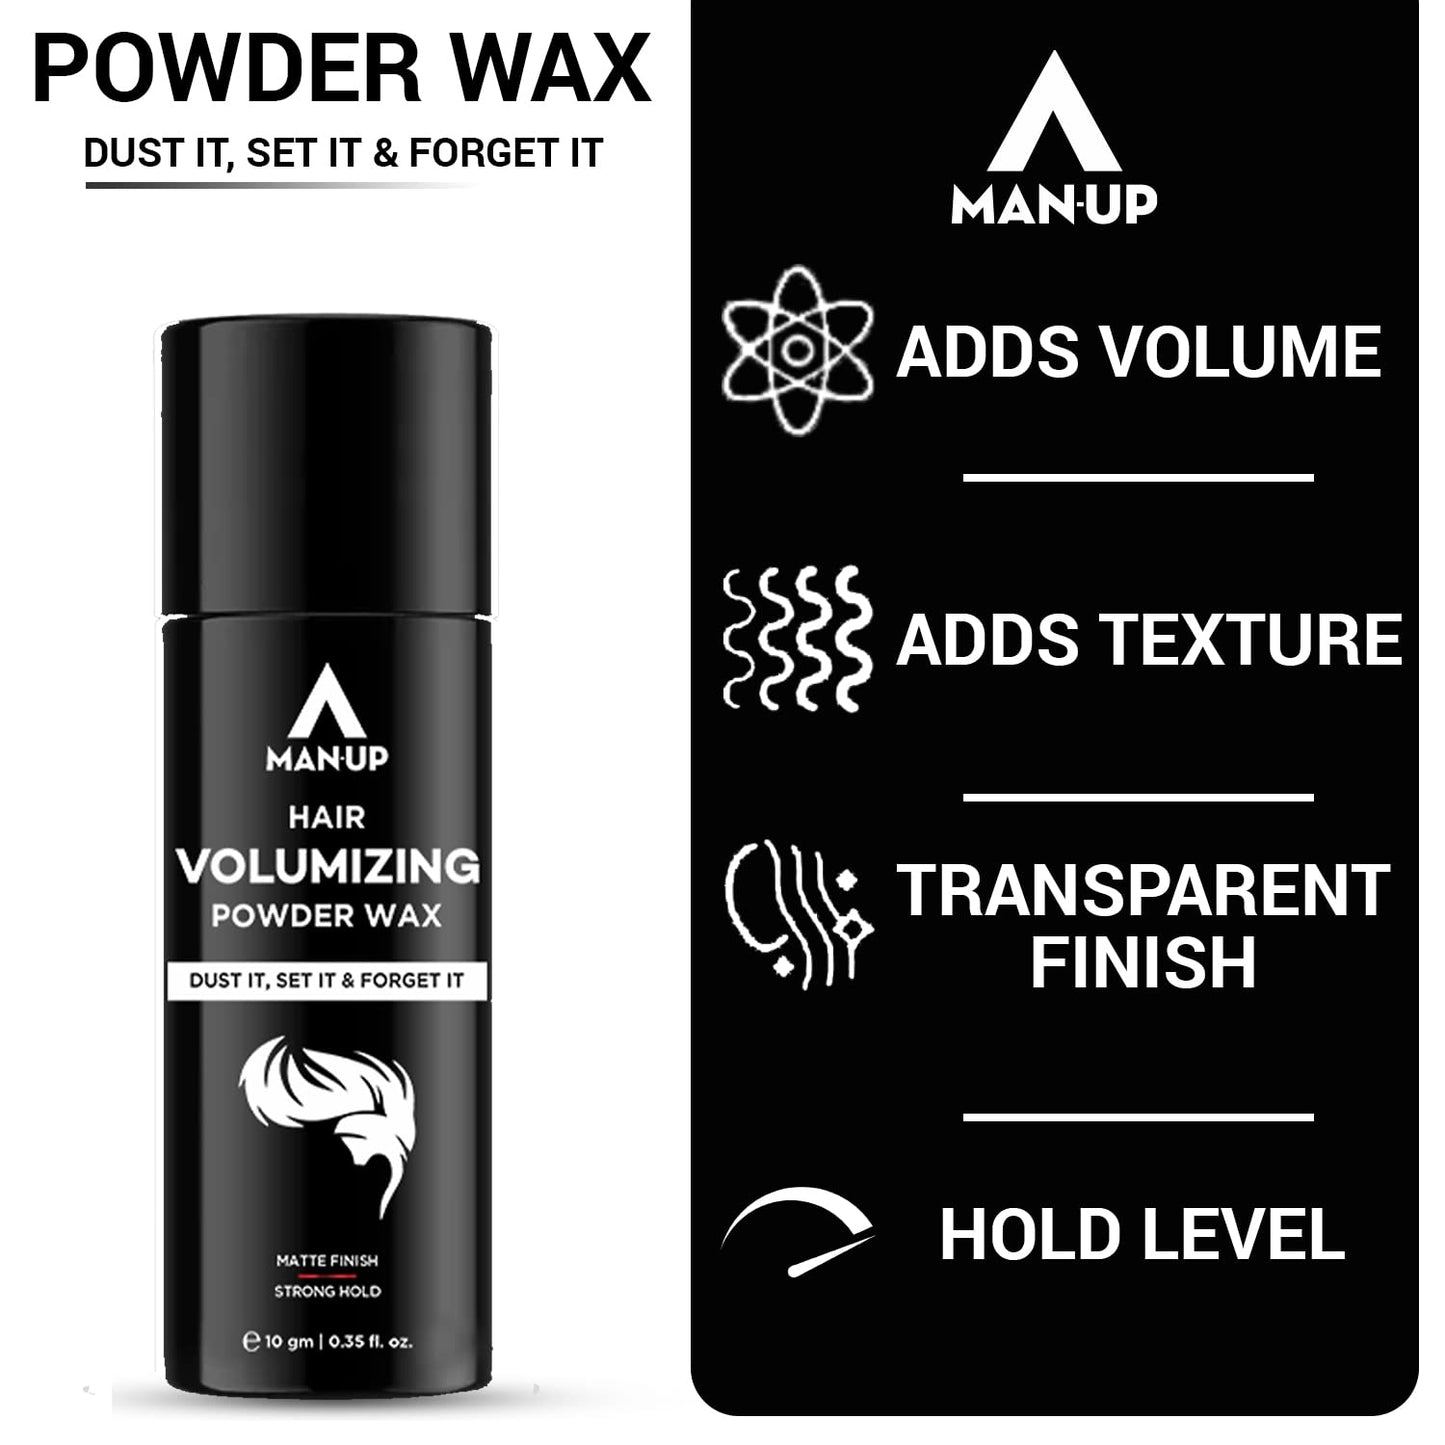 Man-Up Hair Volumizing Powder Wax For Men  Strong Hold With Matte Finish Hair Styling  All Natural Hair Styling Powder  For All Hair Types - 10gm Pack of 5